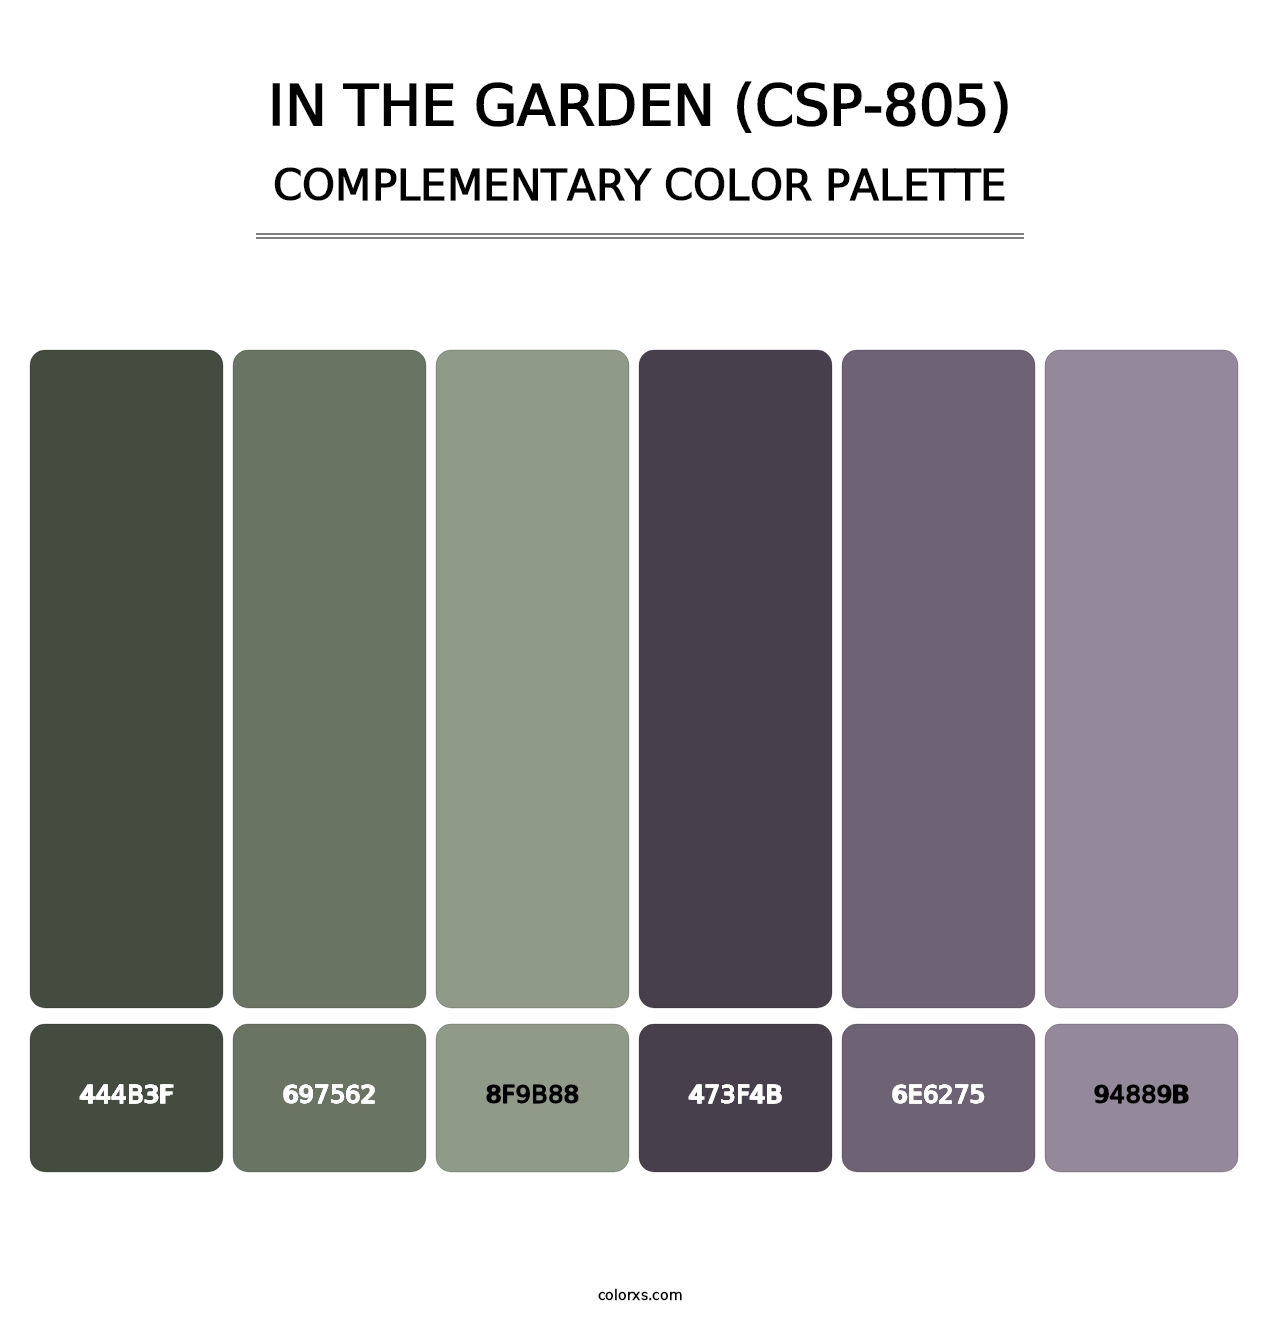 In the Garden (CSP-805) - Complementary Color Palette